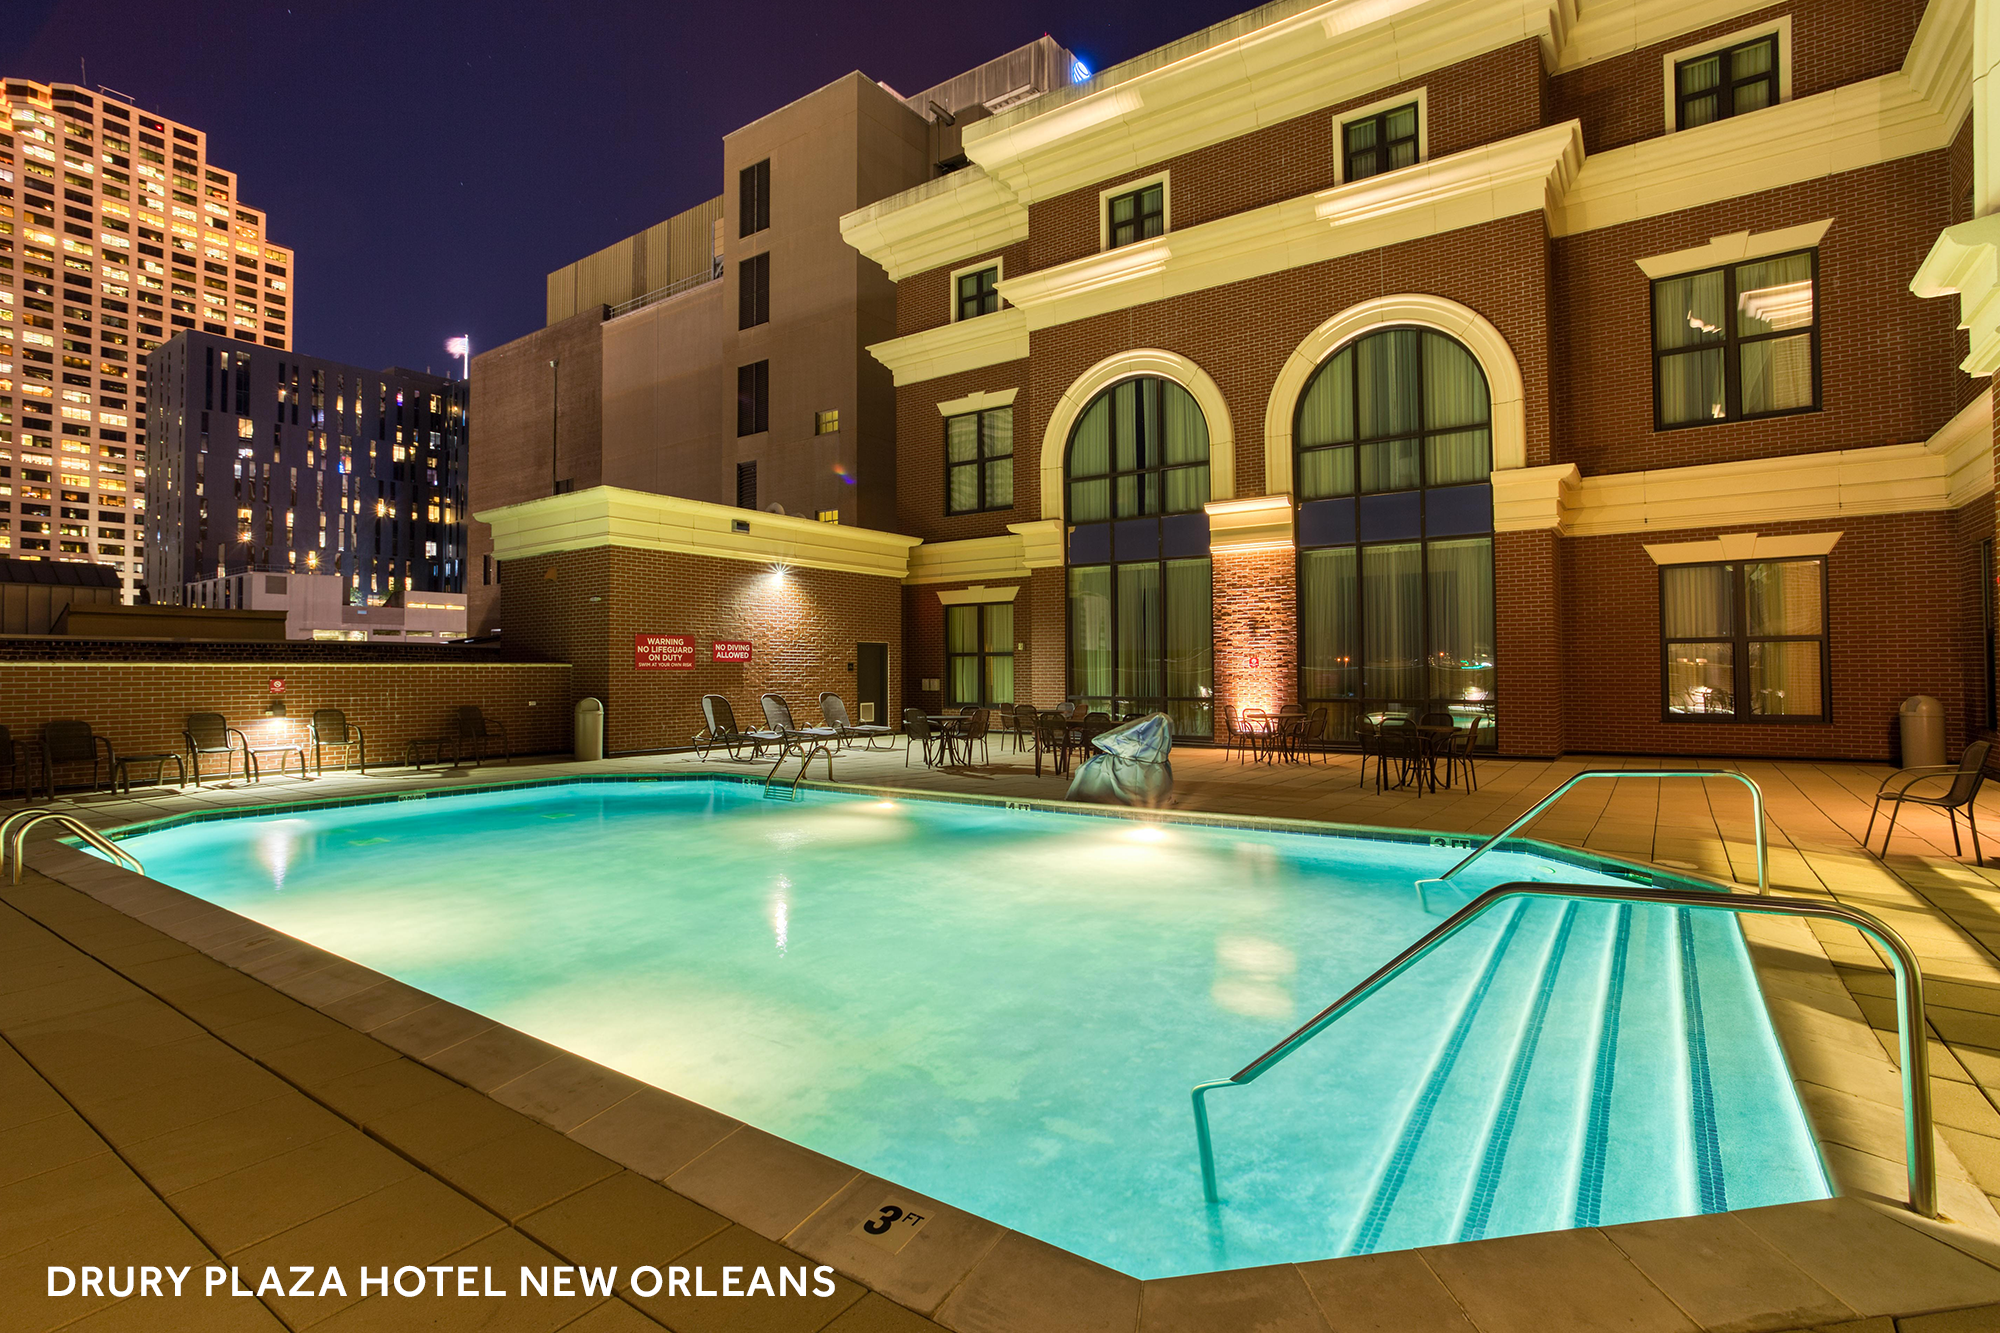 A lit up pool and seating area at night with New Orleans buildings in the background.